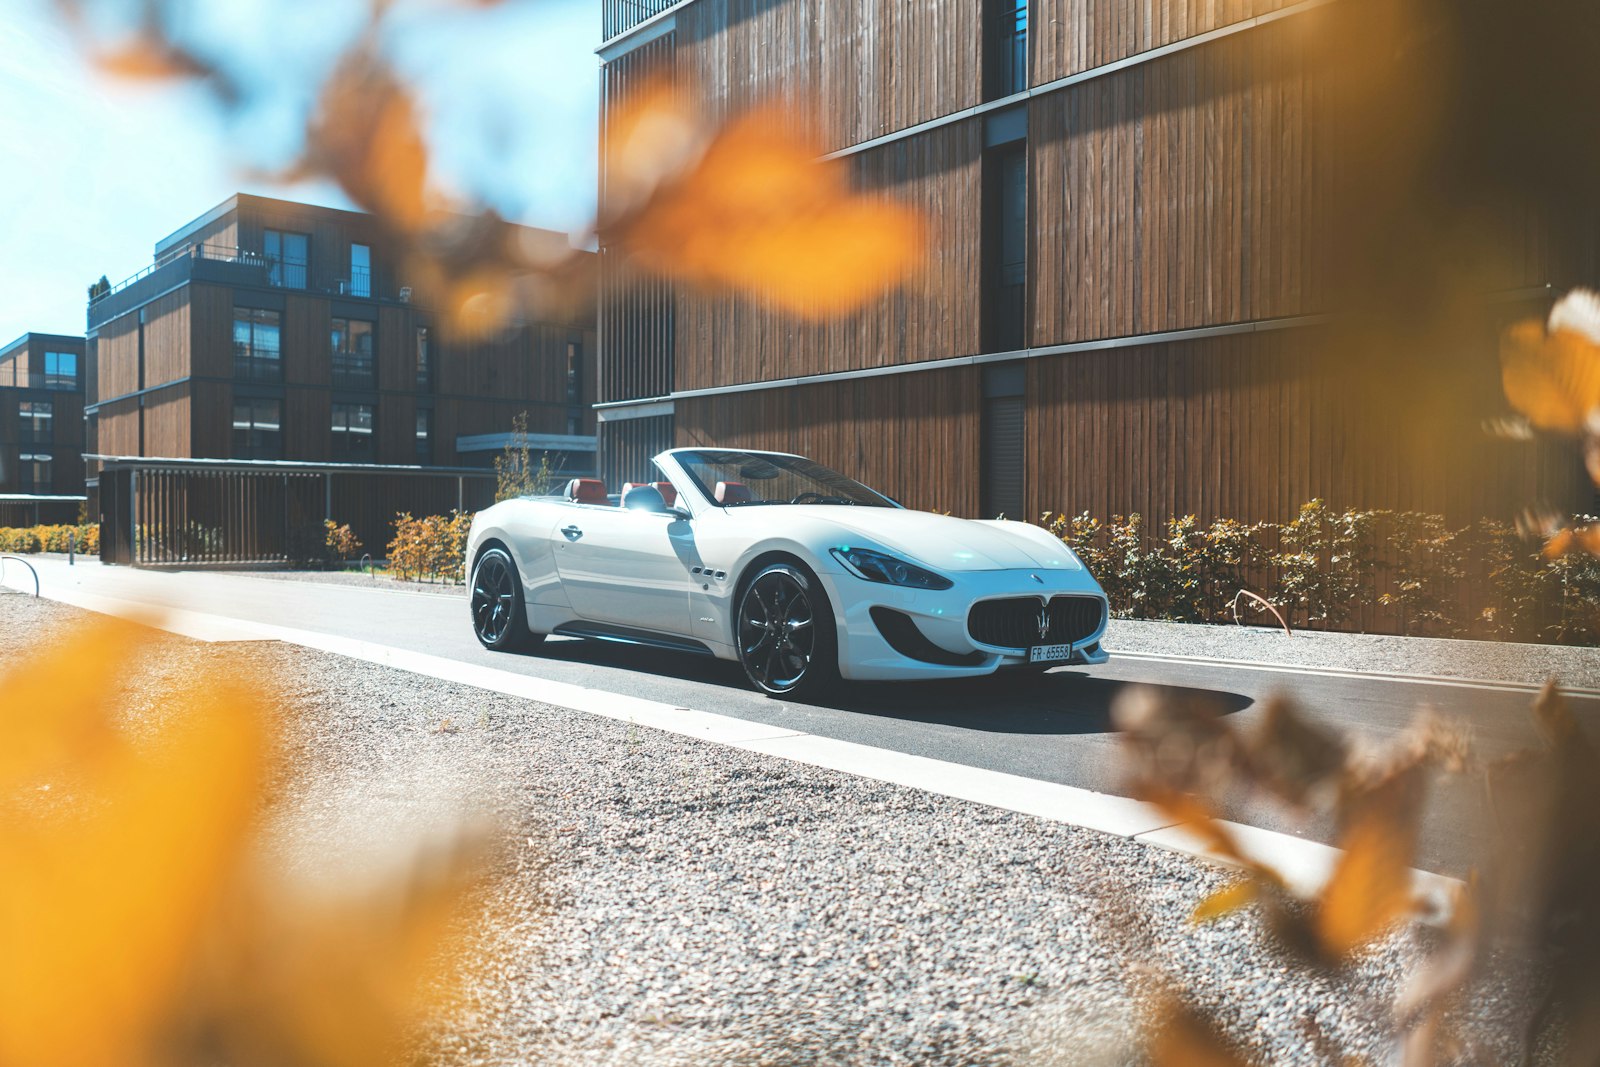 Sony a7 II + Sony FE 28mm F2 sample photo. White convertible parked near photography